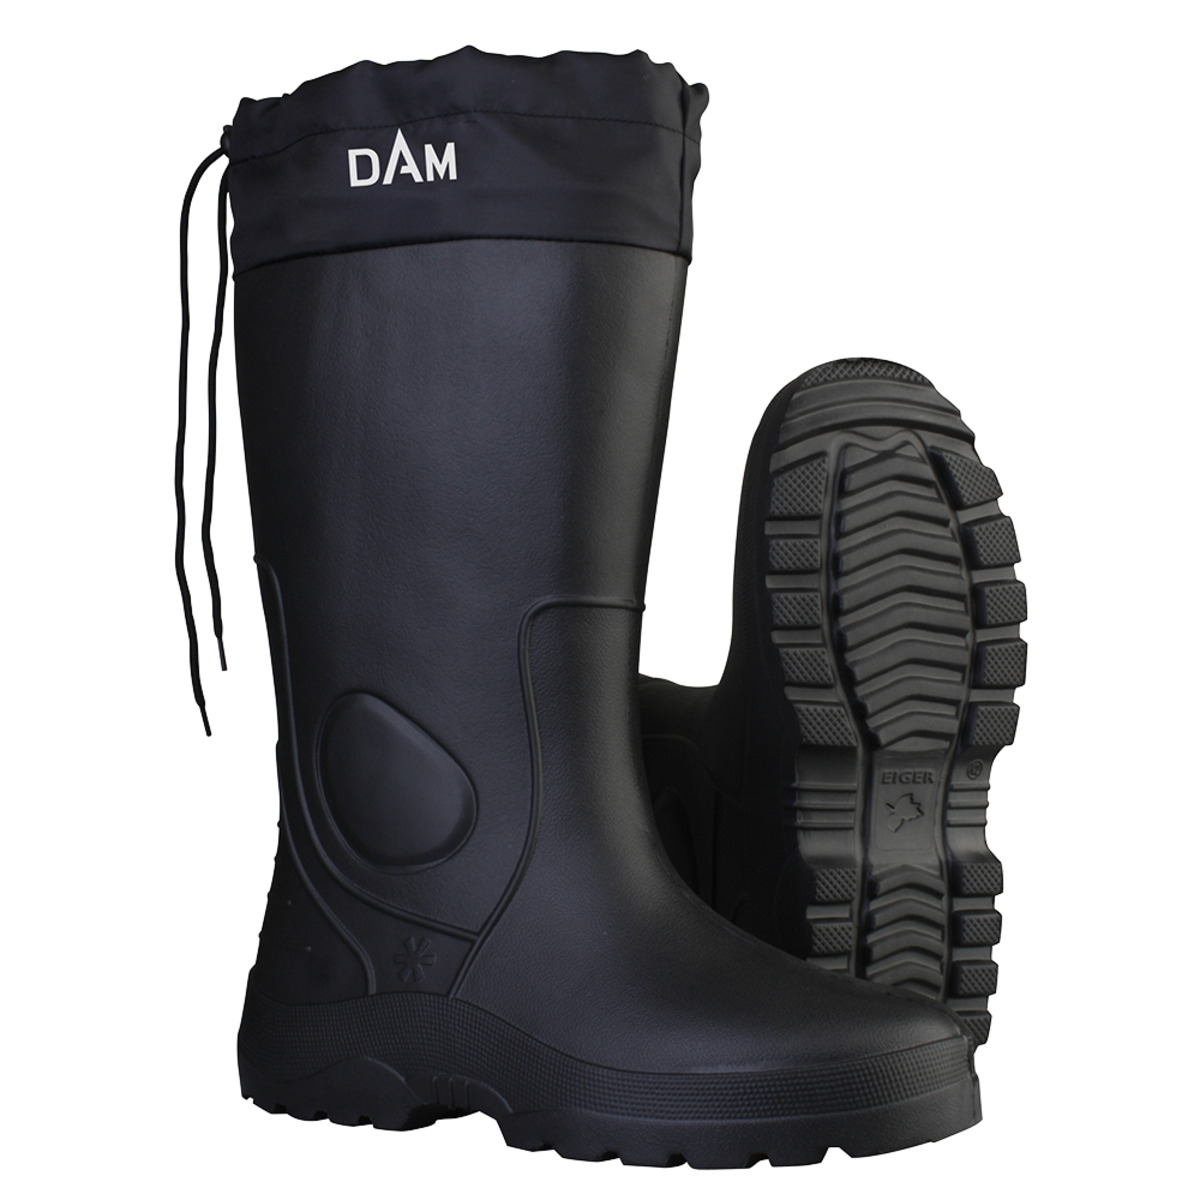 Dam Lapland Thermo Boots - 41/7 BLACK